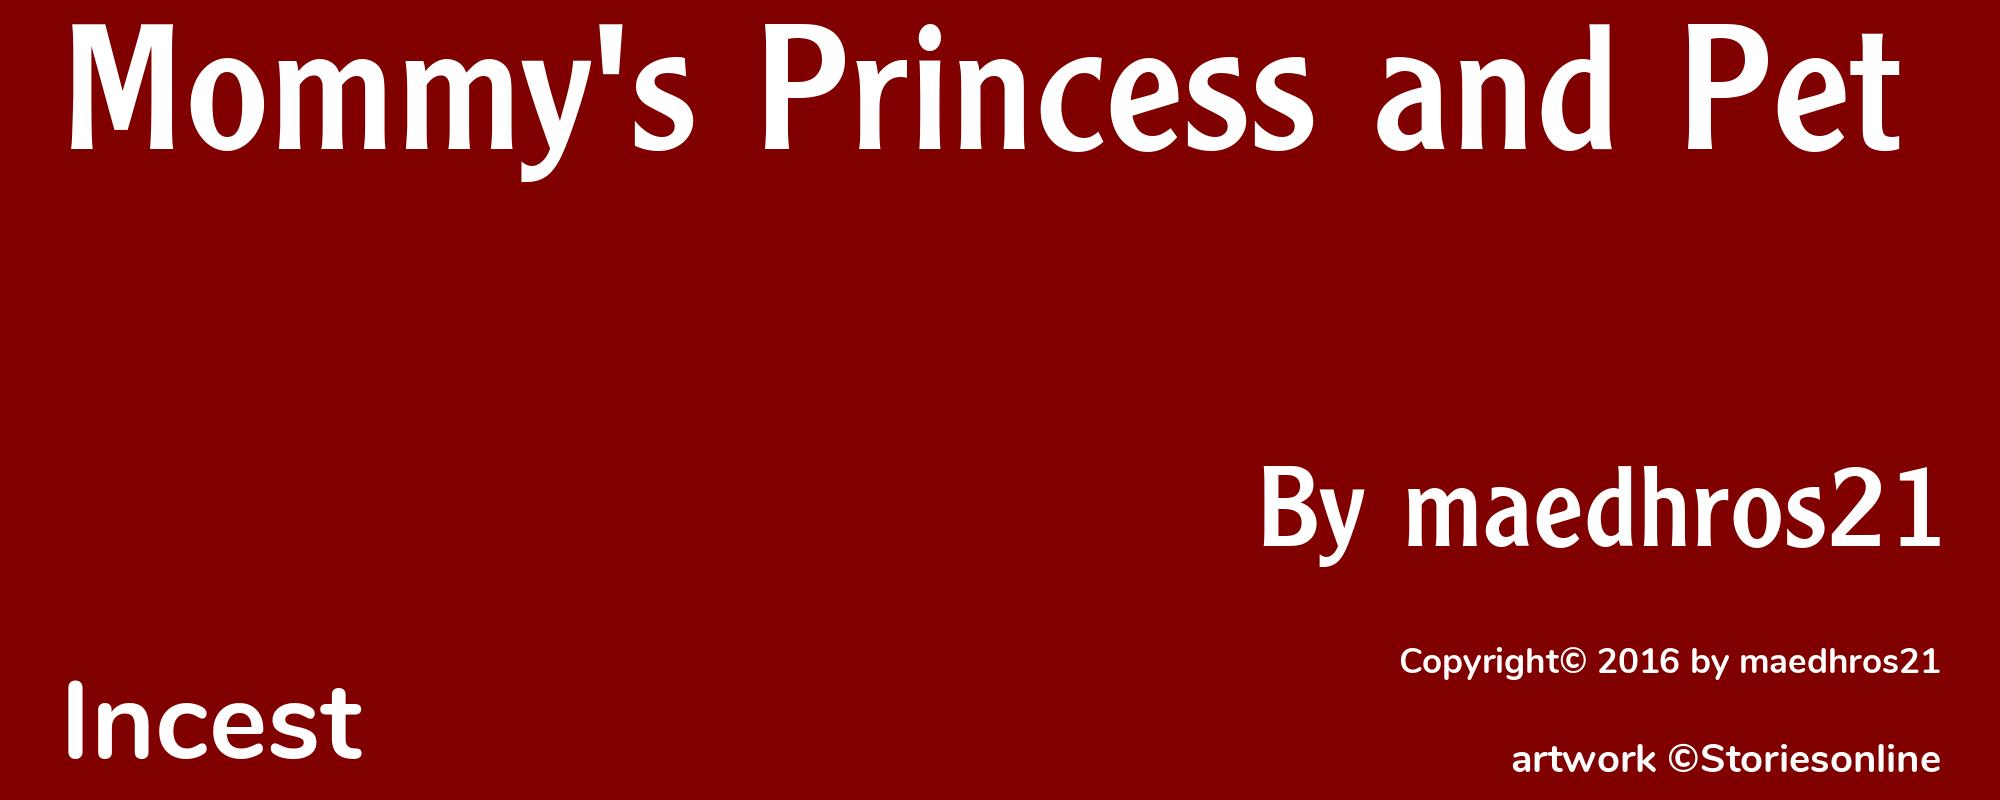 Mommy's Princess and Pet - Cover